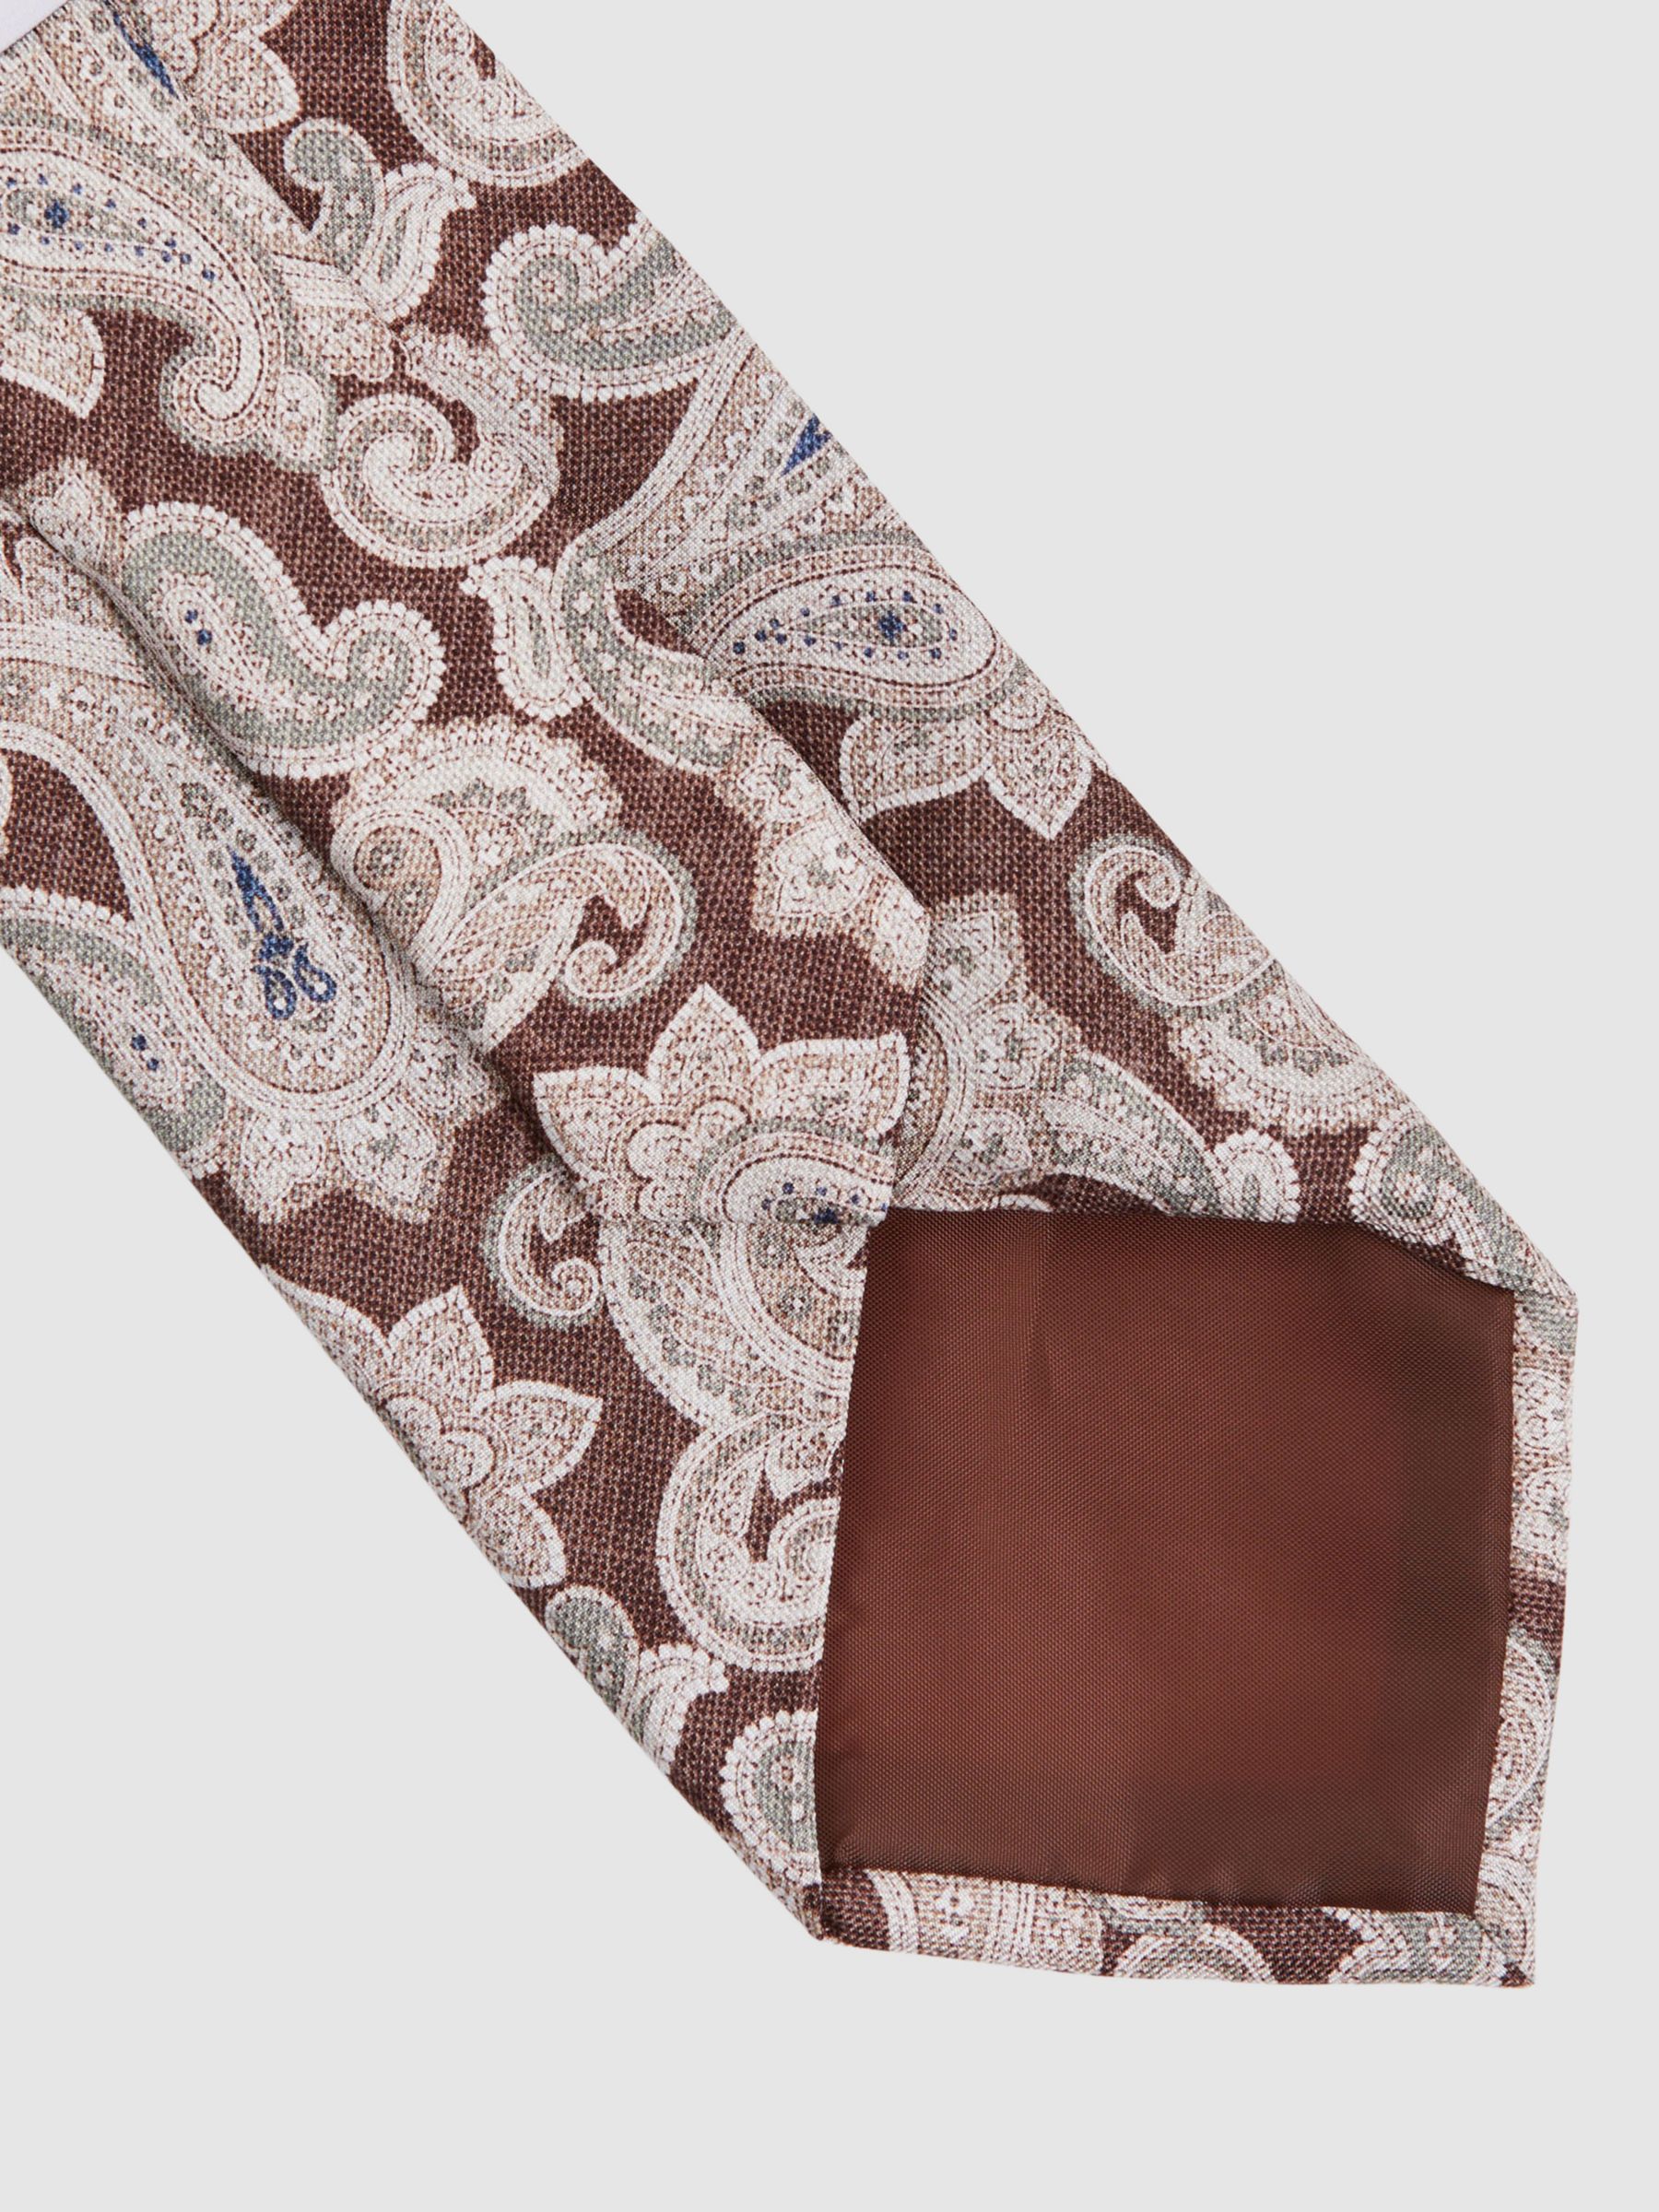 Reiss Giovanni Paisley Silk Tie, Tobacco/Oatmeal, One Size